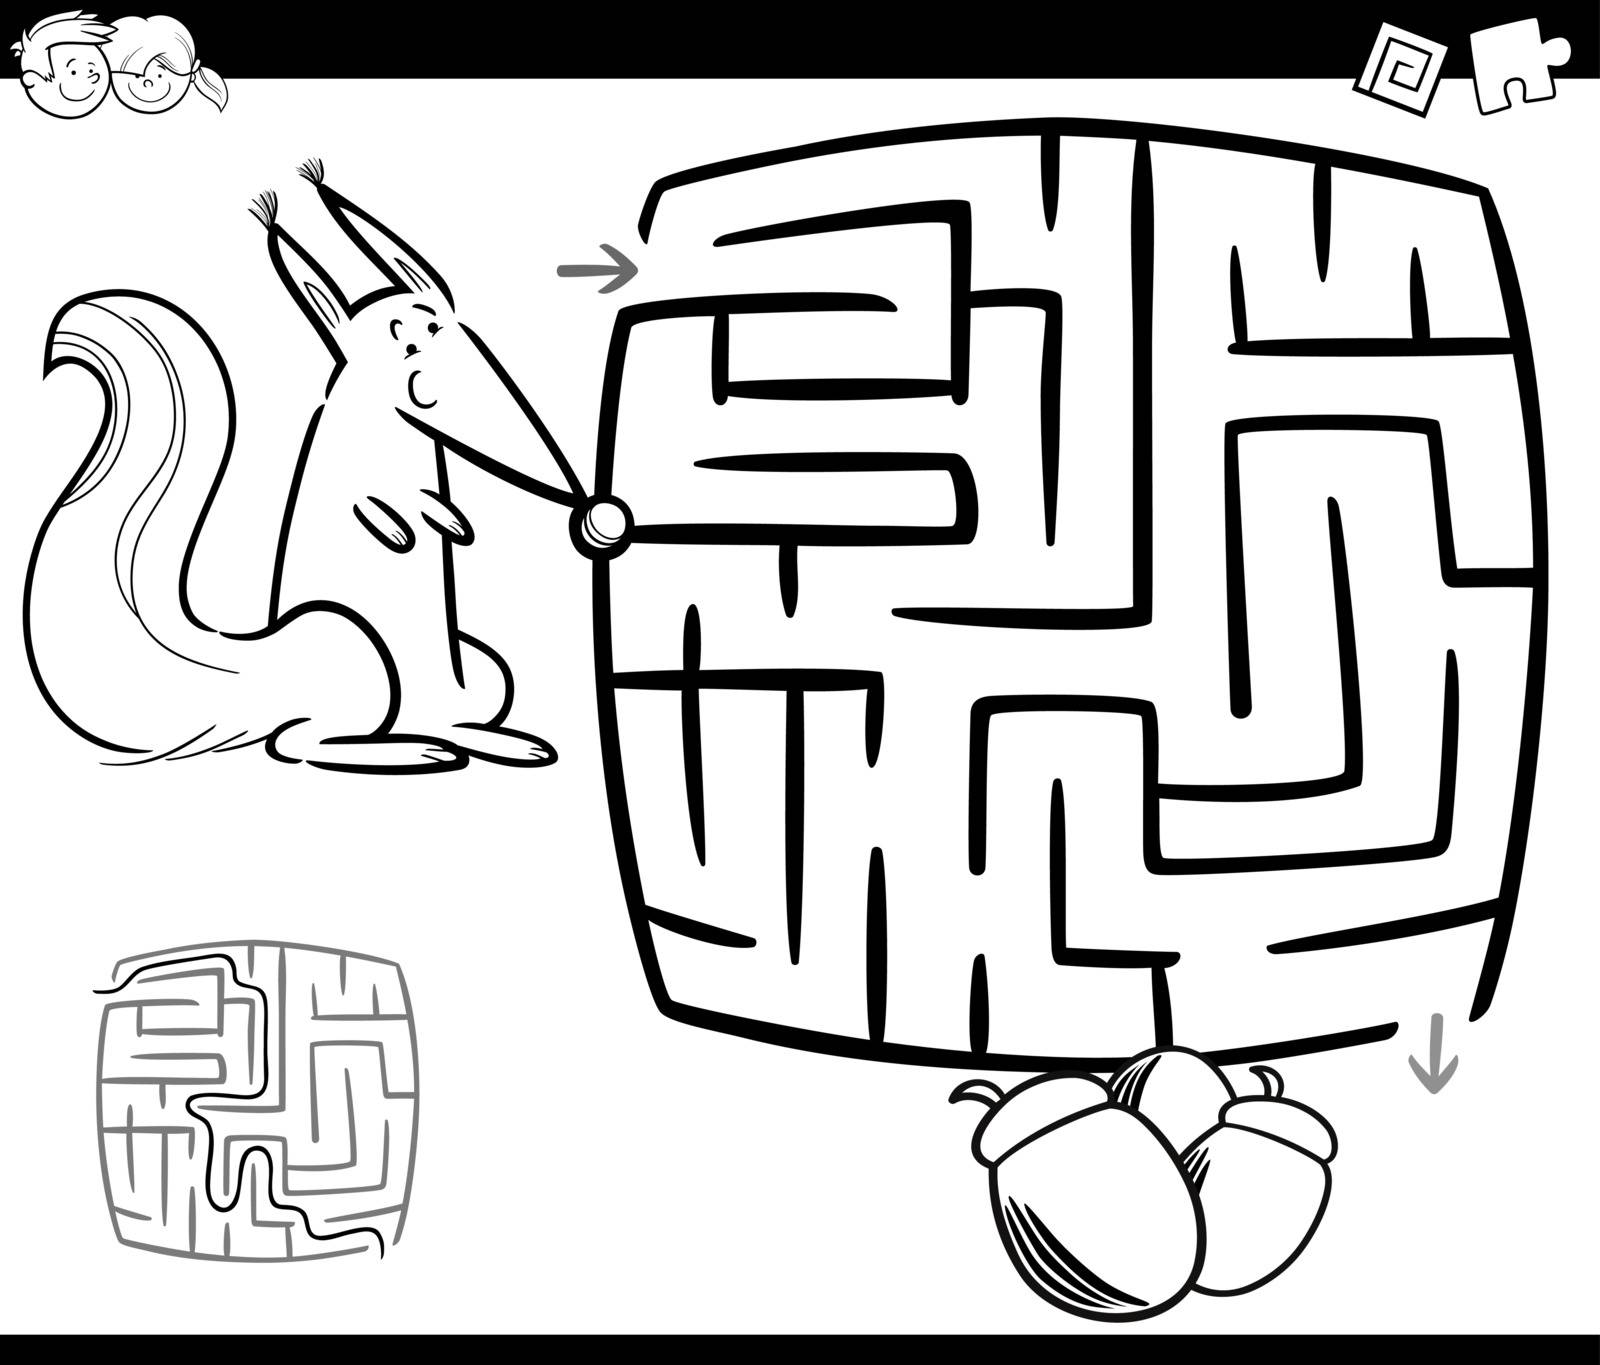 Black and White Cartoon Illustration of Education Maze or Labyrinth Game for Children with Squirrel and Acorns Coloring Page